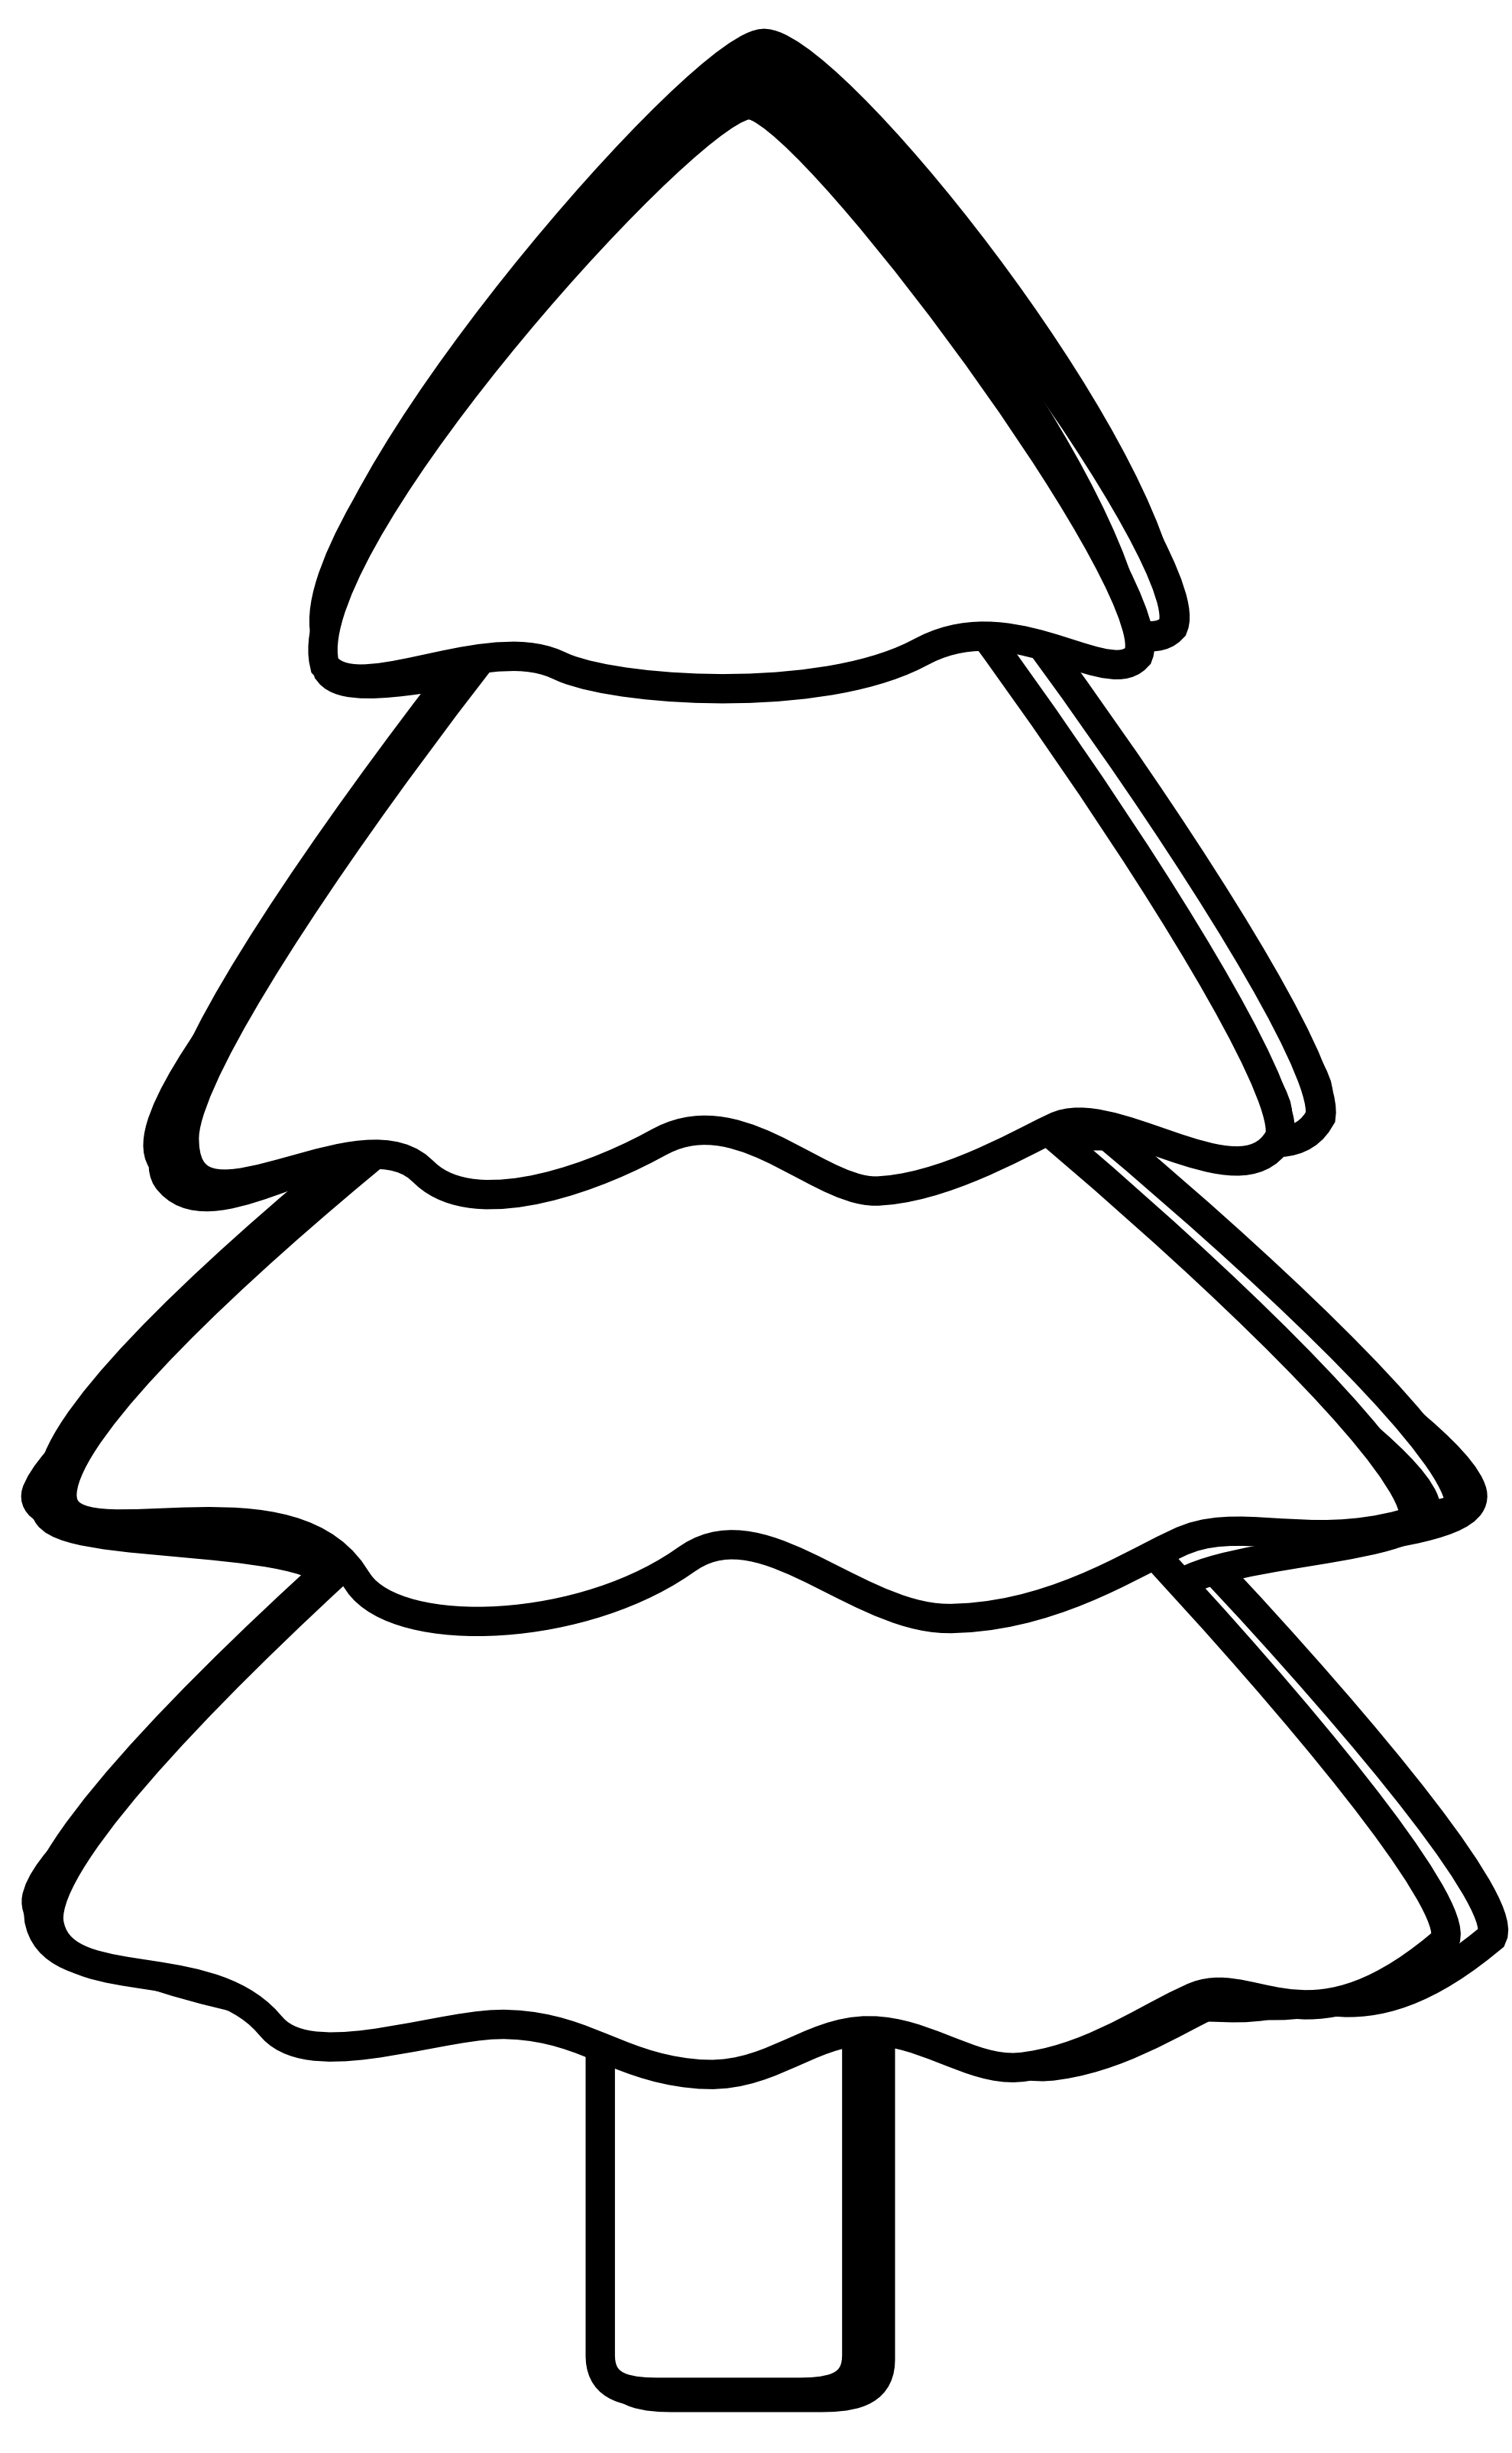 Pine Tree Clipart Black And White | Clipart Panda - Free Clipart ...